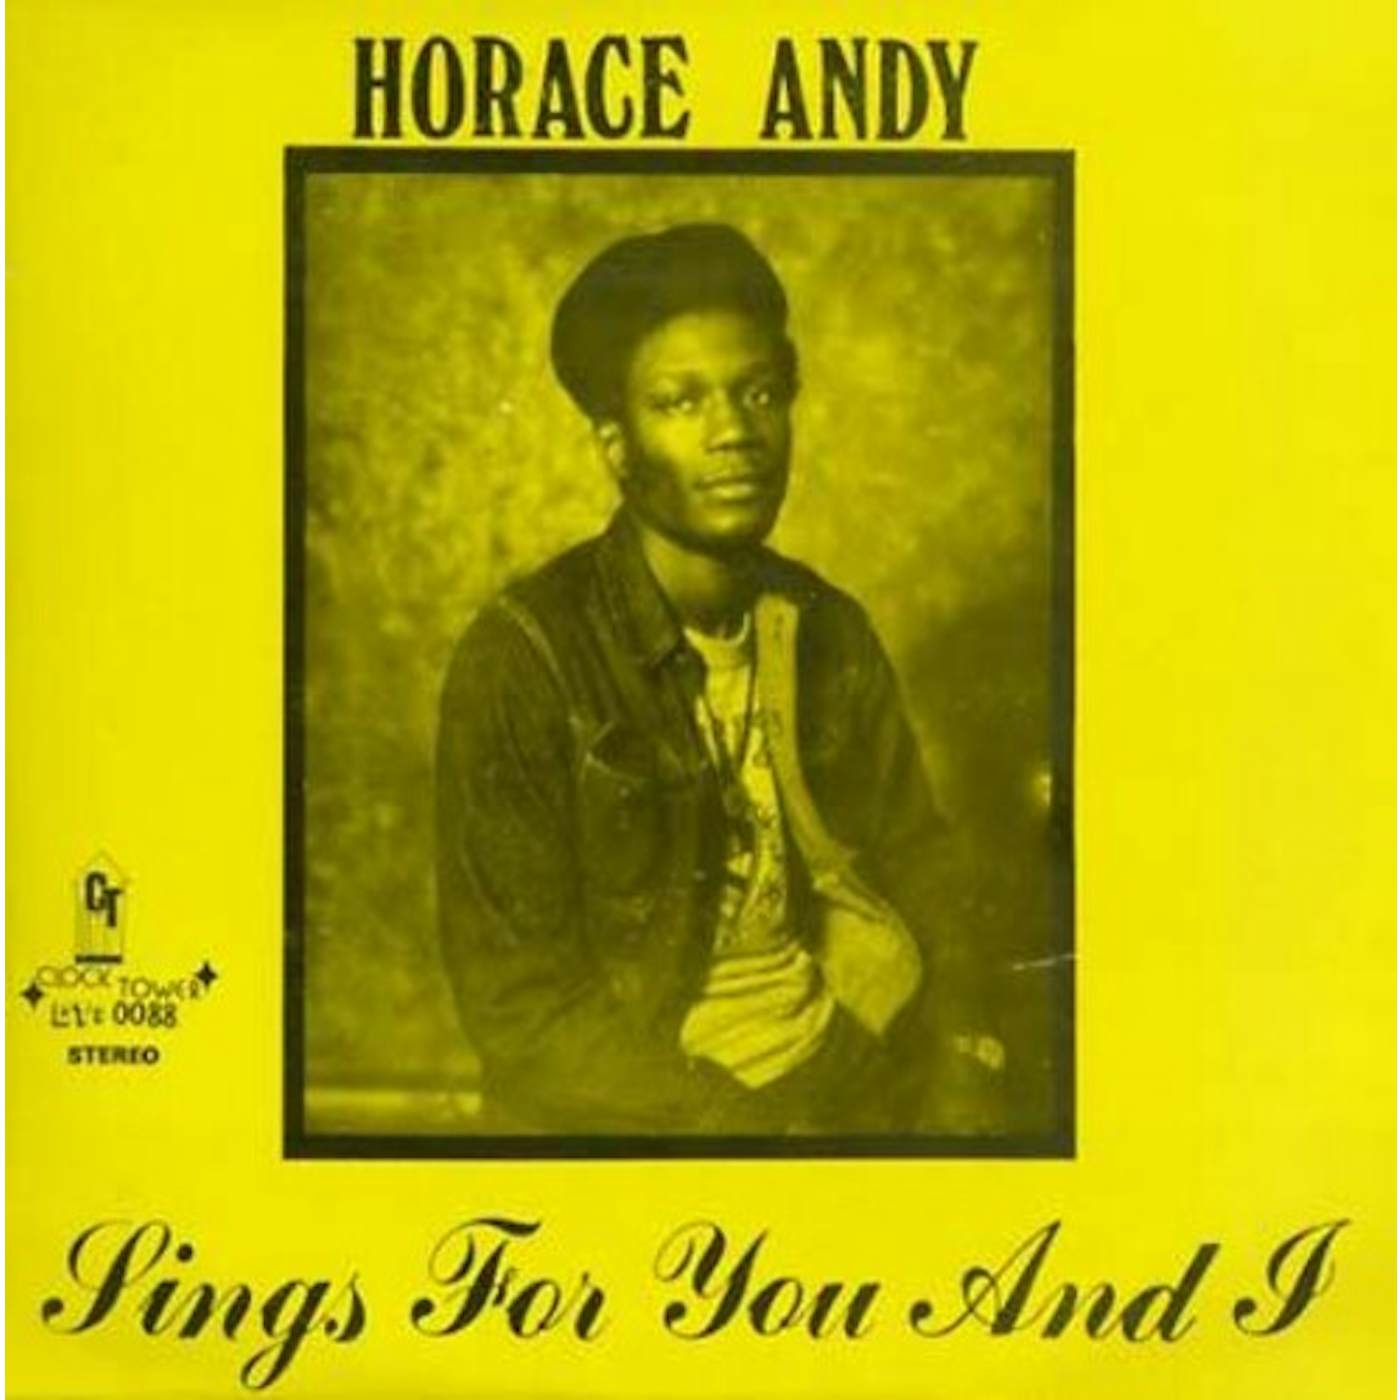 Horace Andy Sings for You and I Vinyl Record